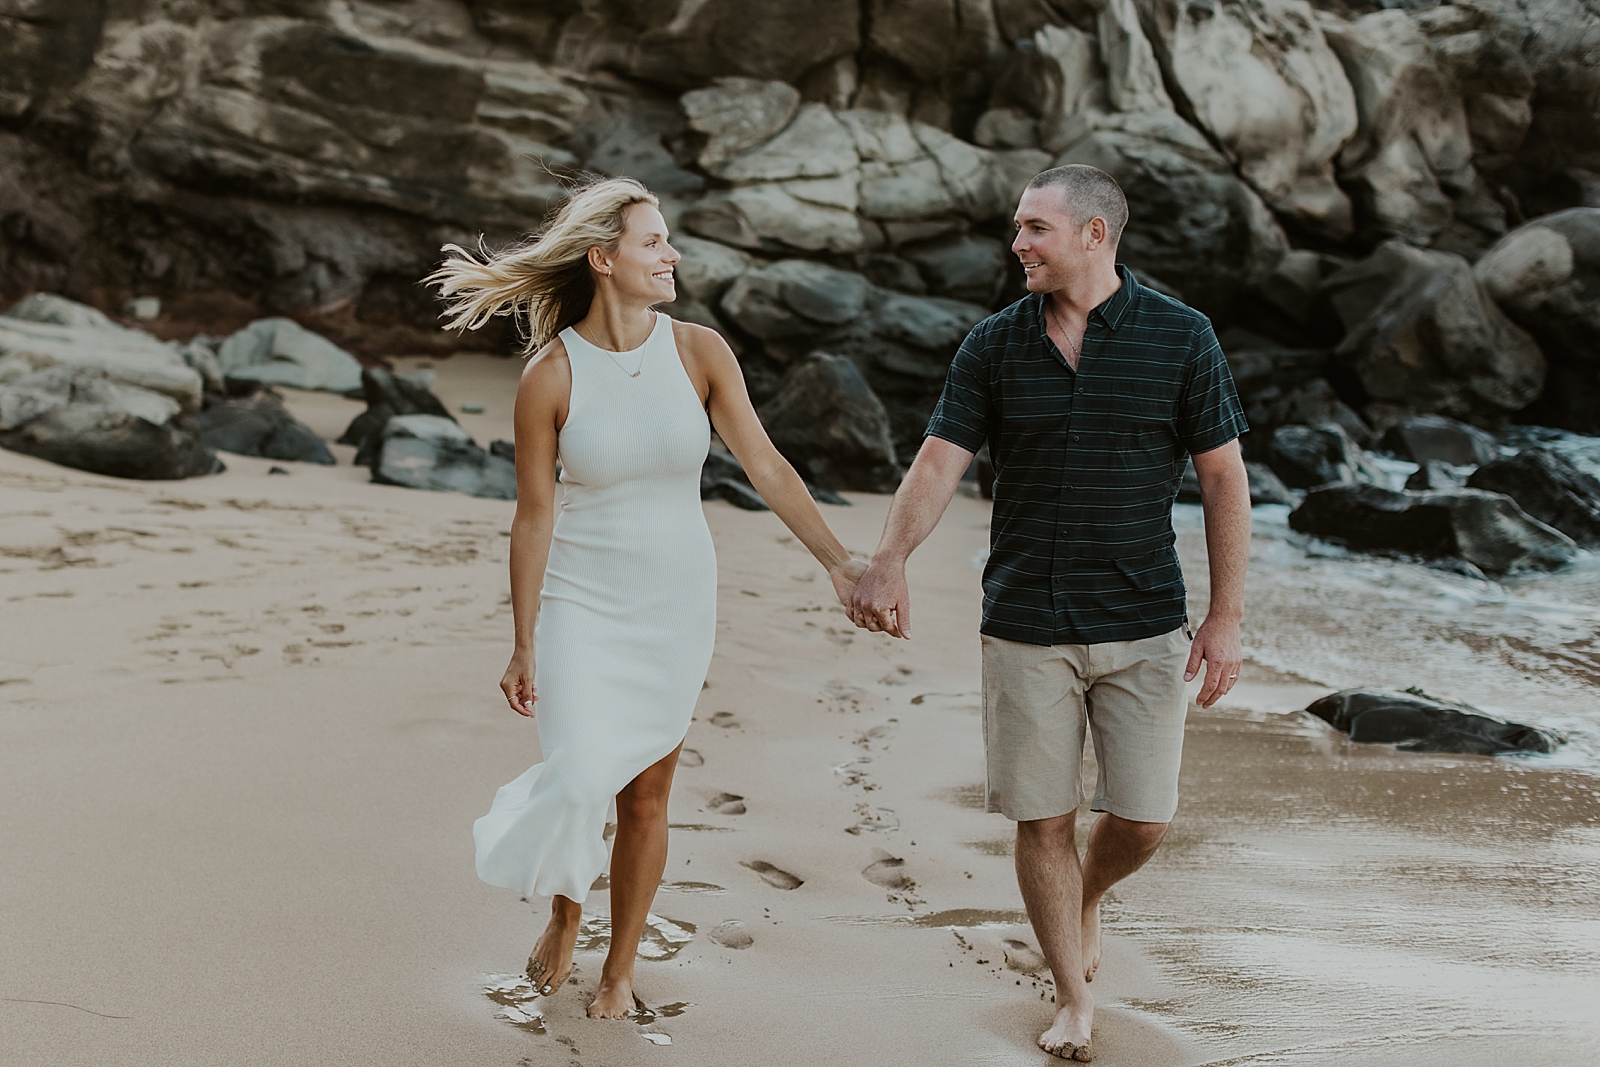 Couple holding hands and walking on the beach together with rocky cliff behind them